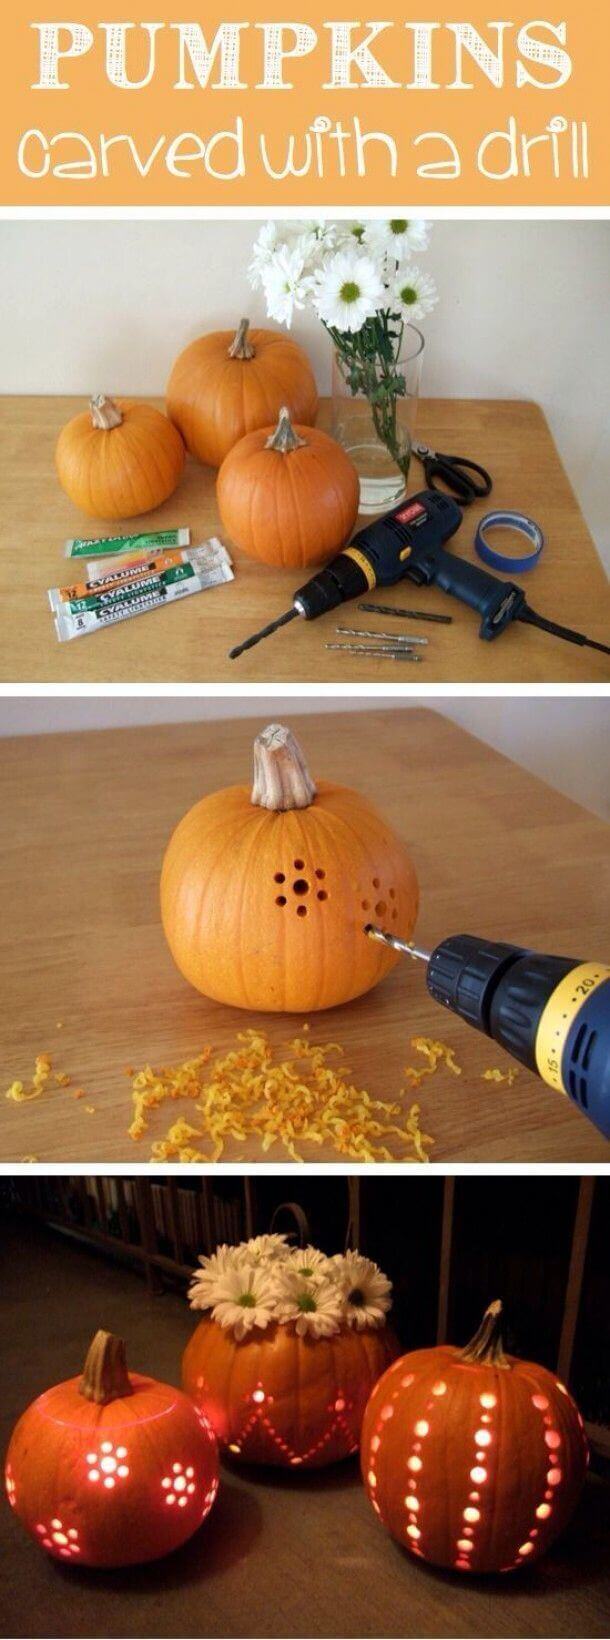 DIY Pumpkin Carving Ideas: Carve Your Pumpkins With A Drill